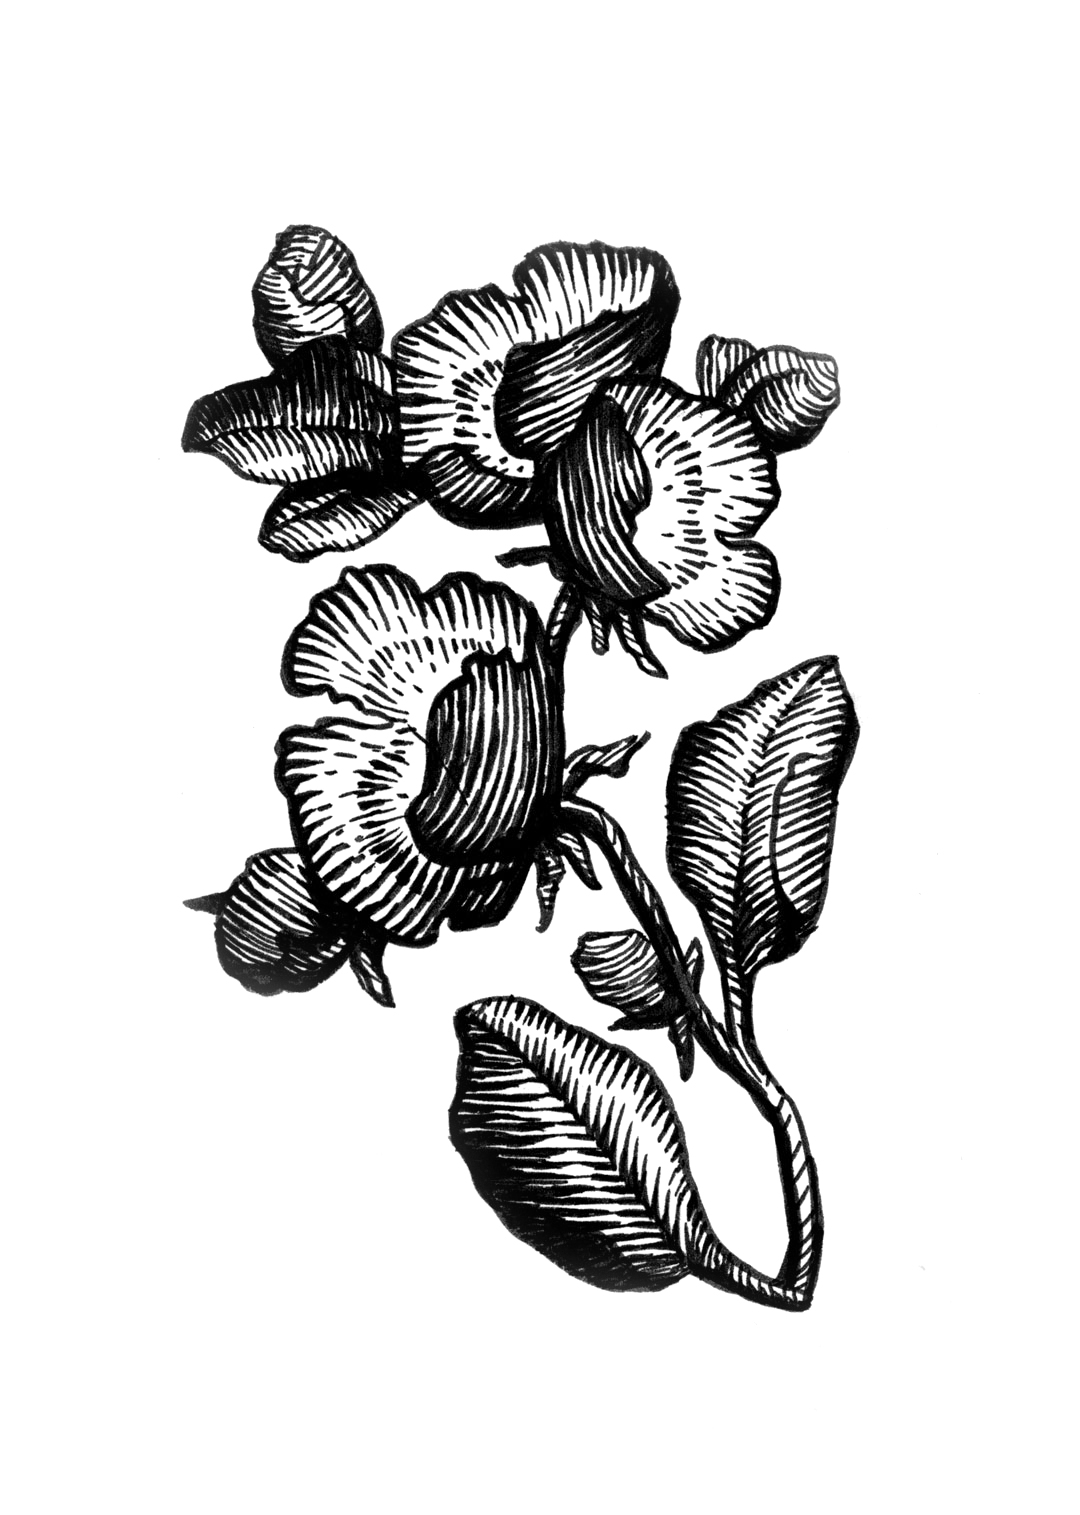 Floral illustration by Laura Dreyer, drawn in ink.